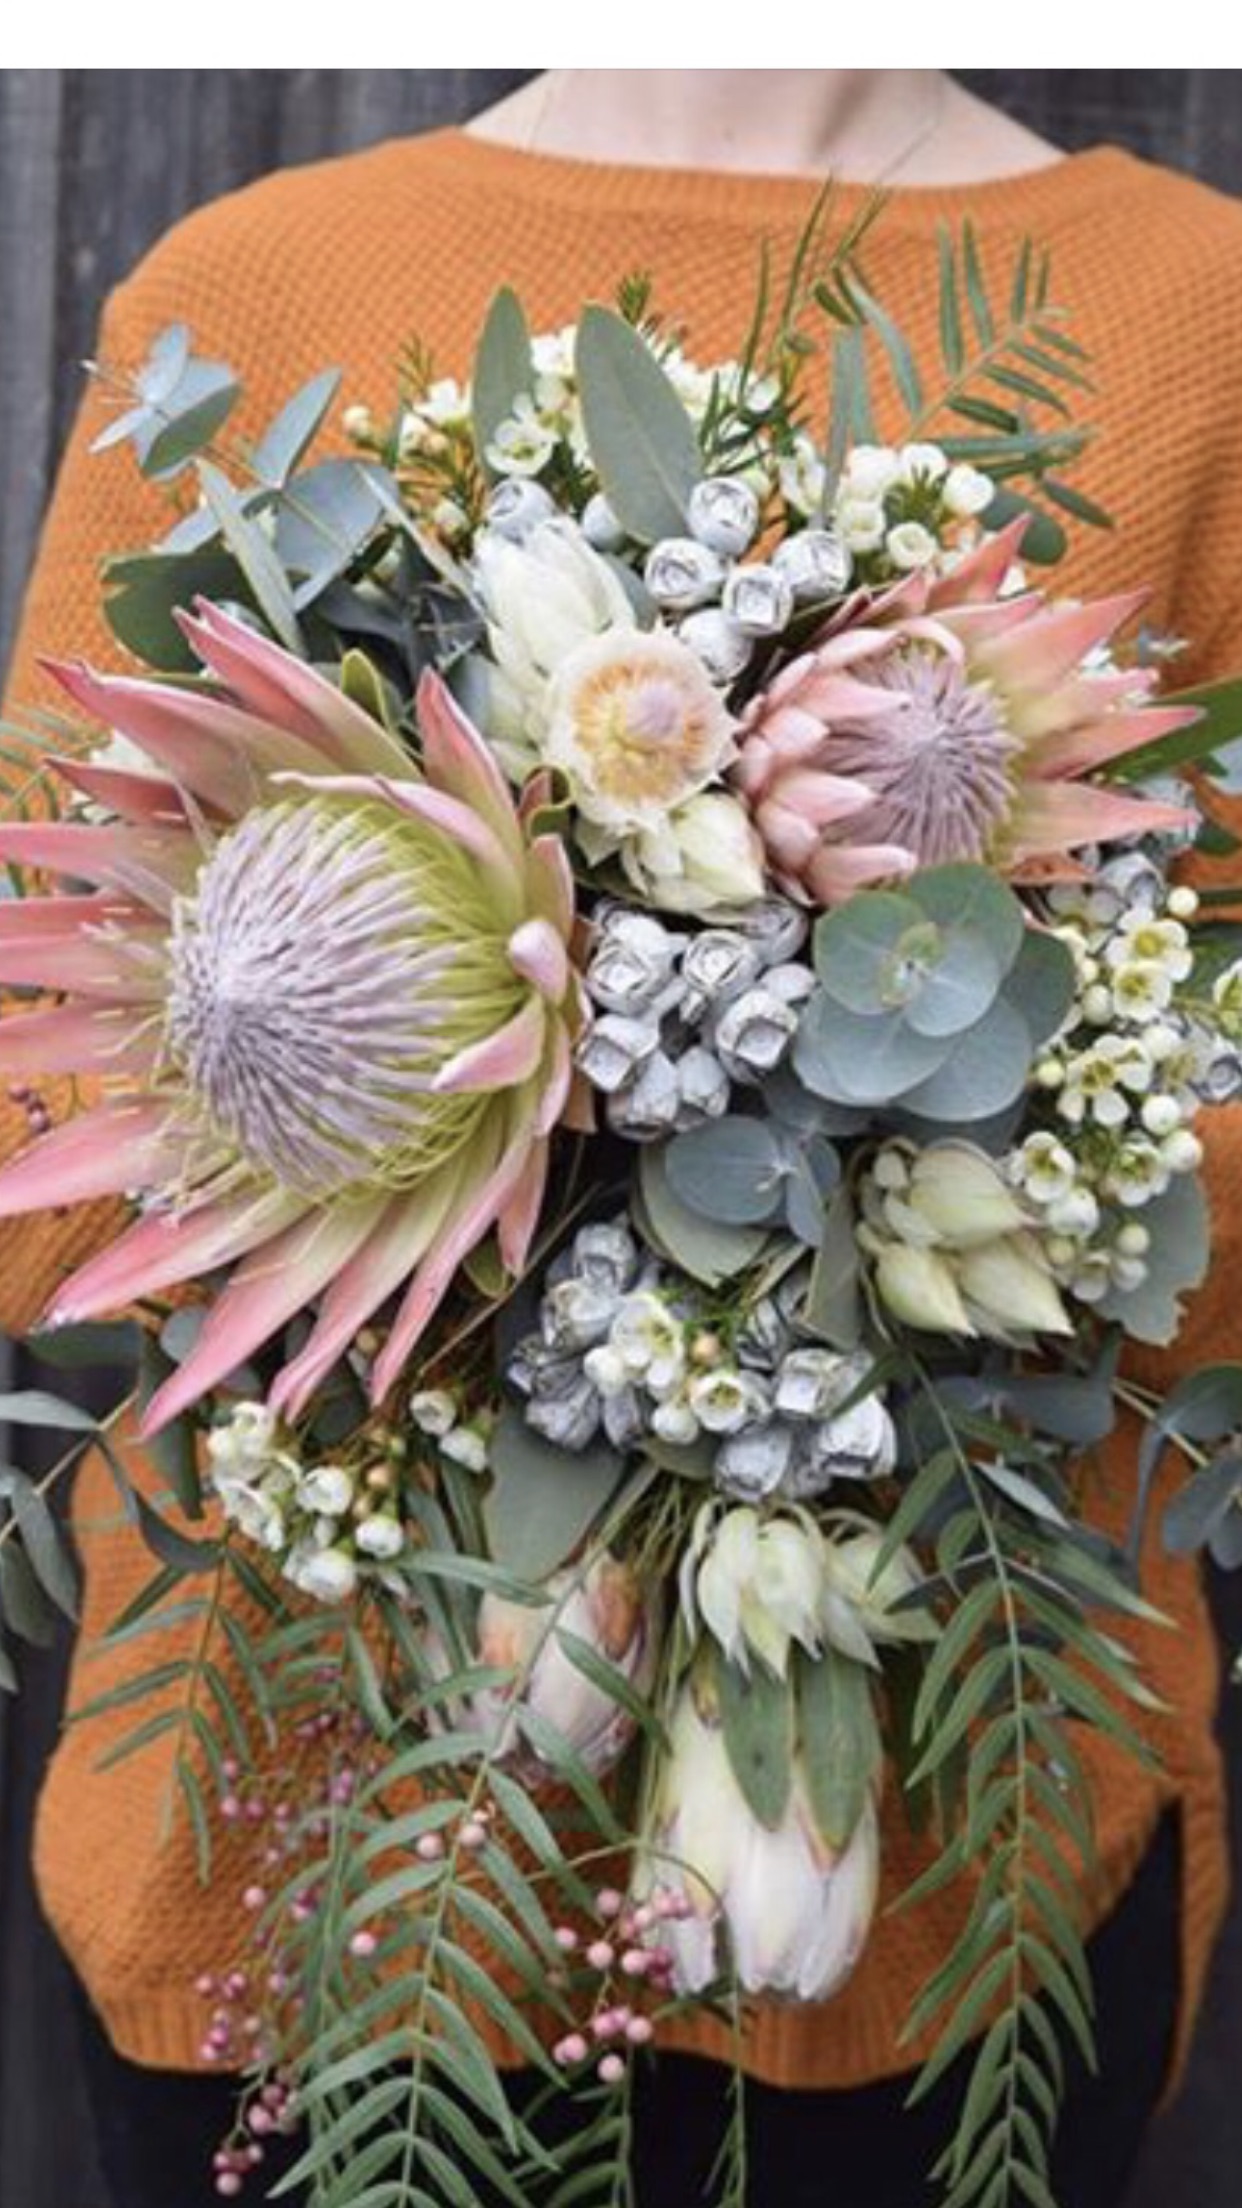 A bouquet of flowers with various types of foliage.